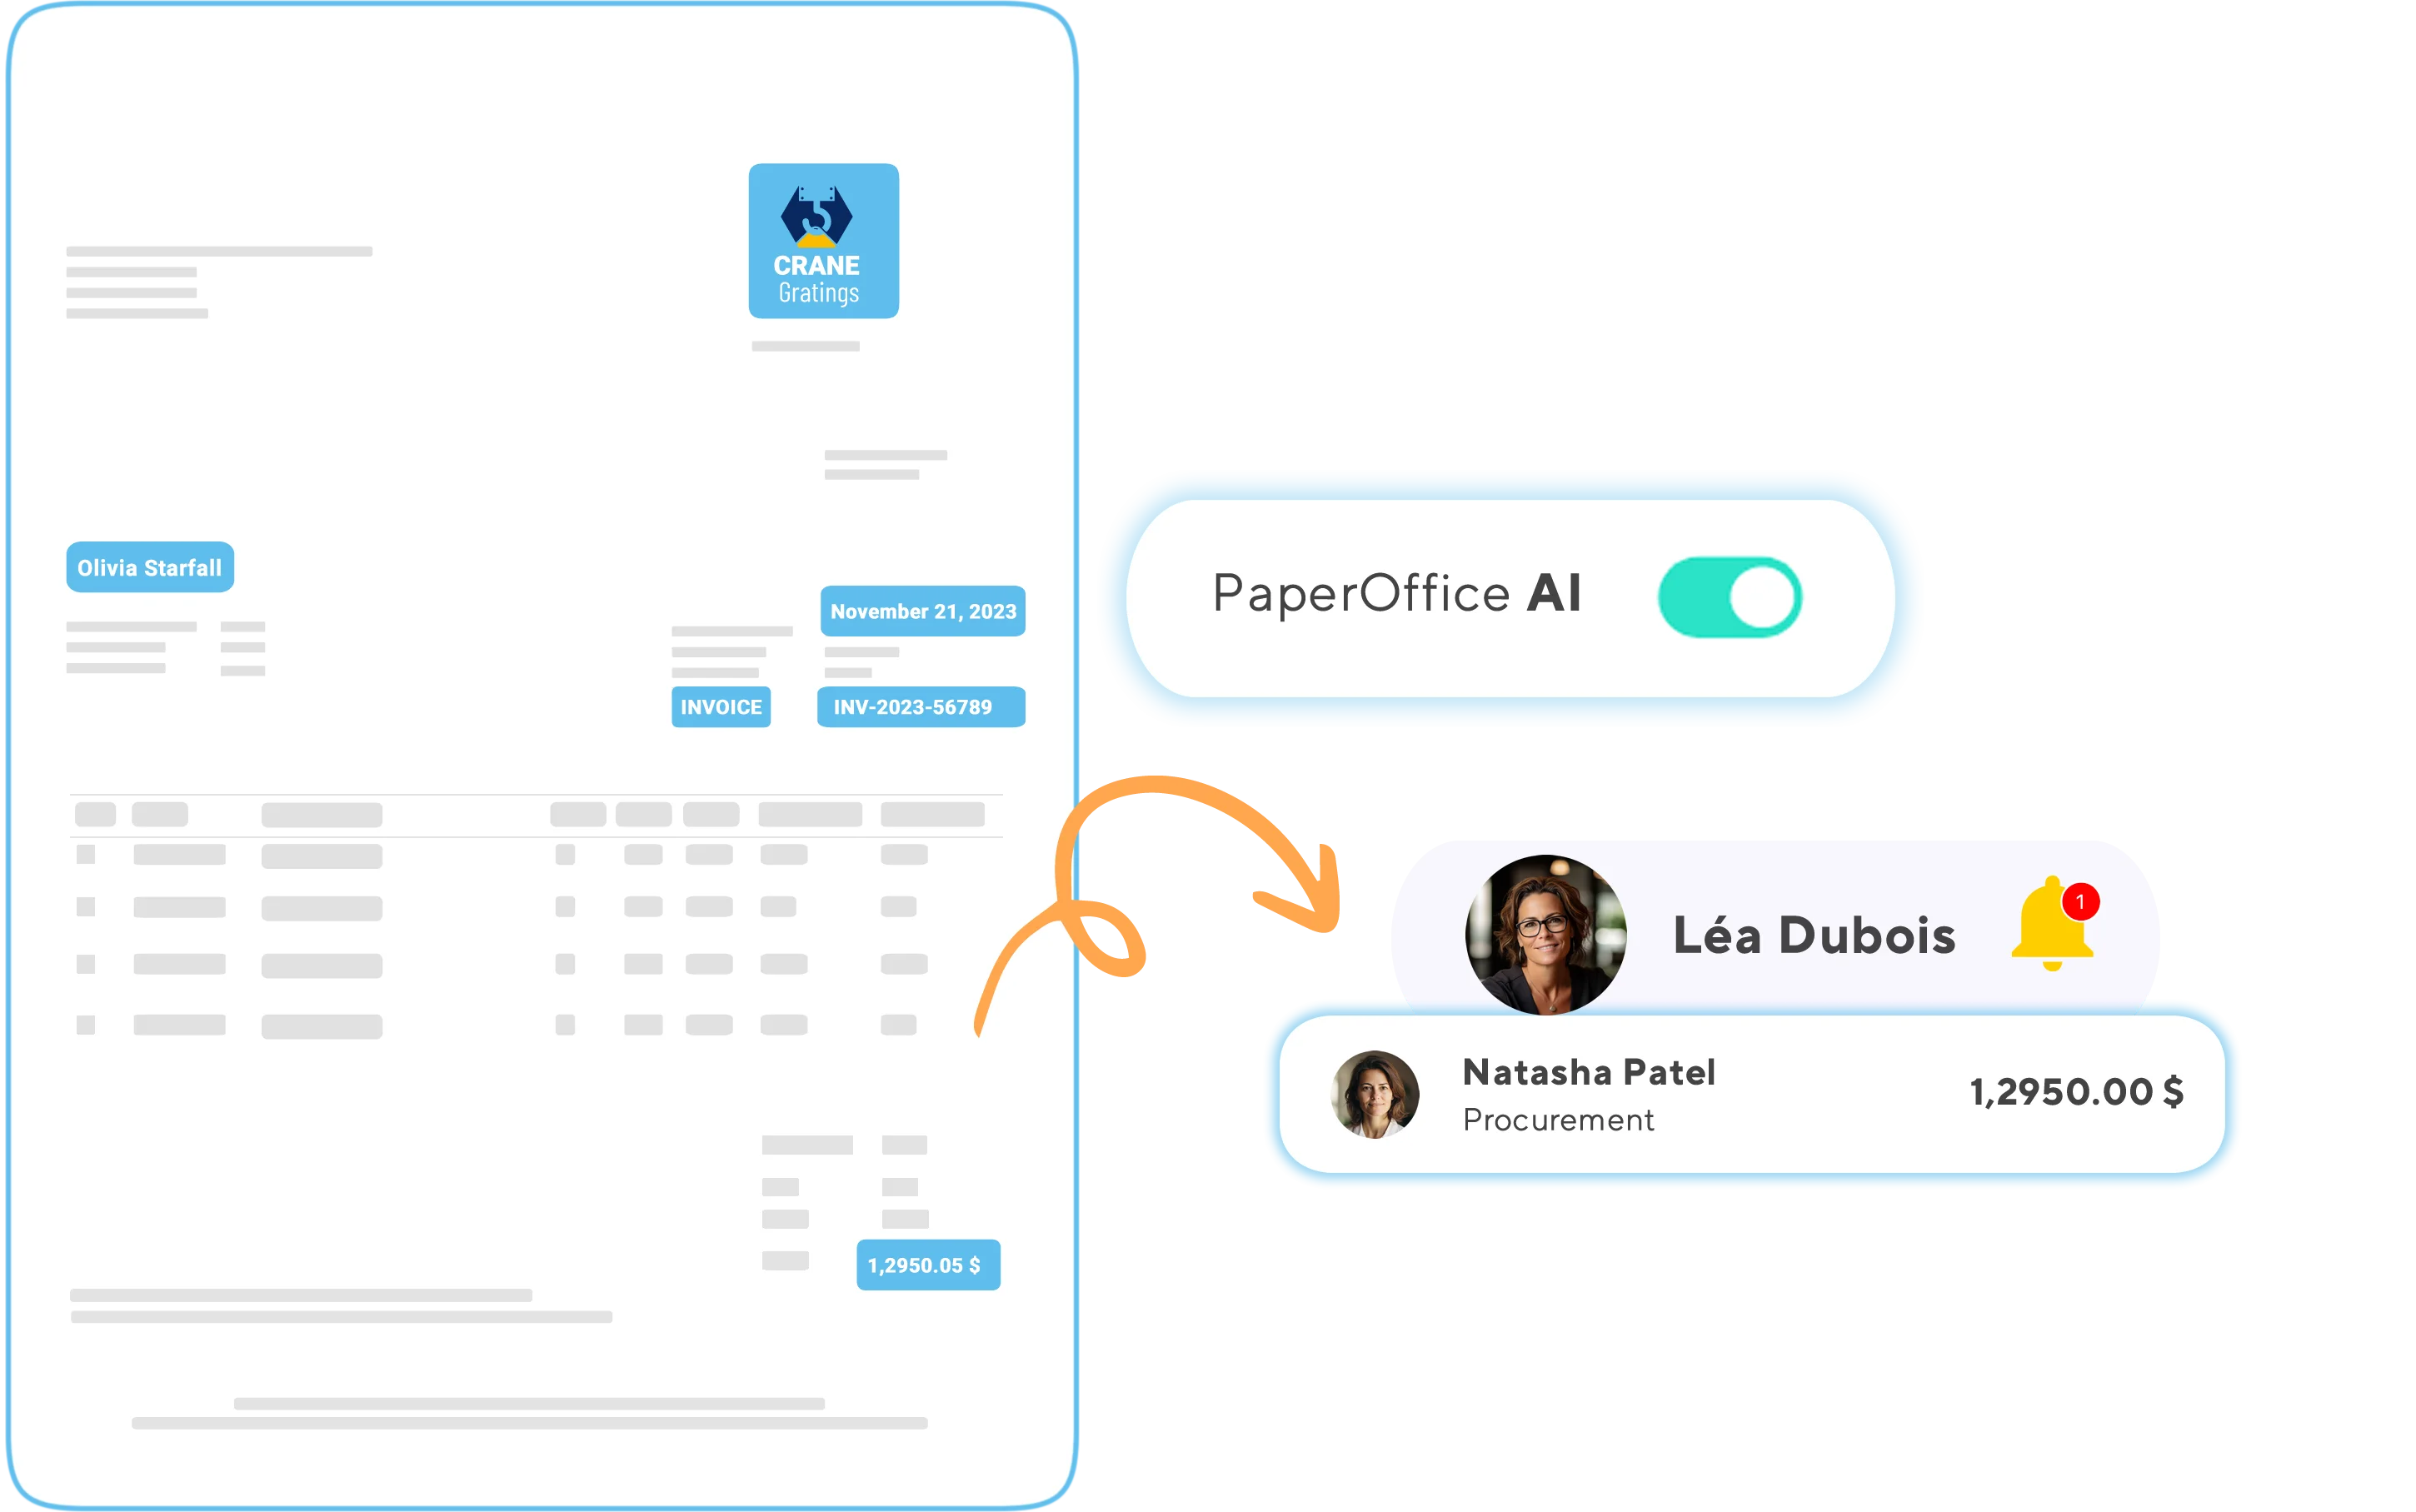 Revolutionary document capture with PaperOffice AI